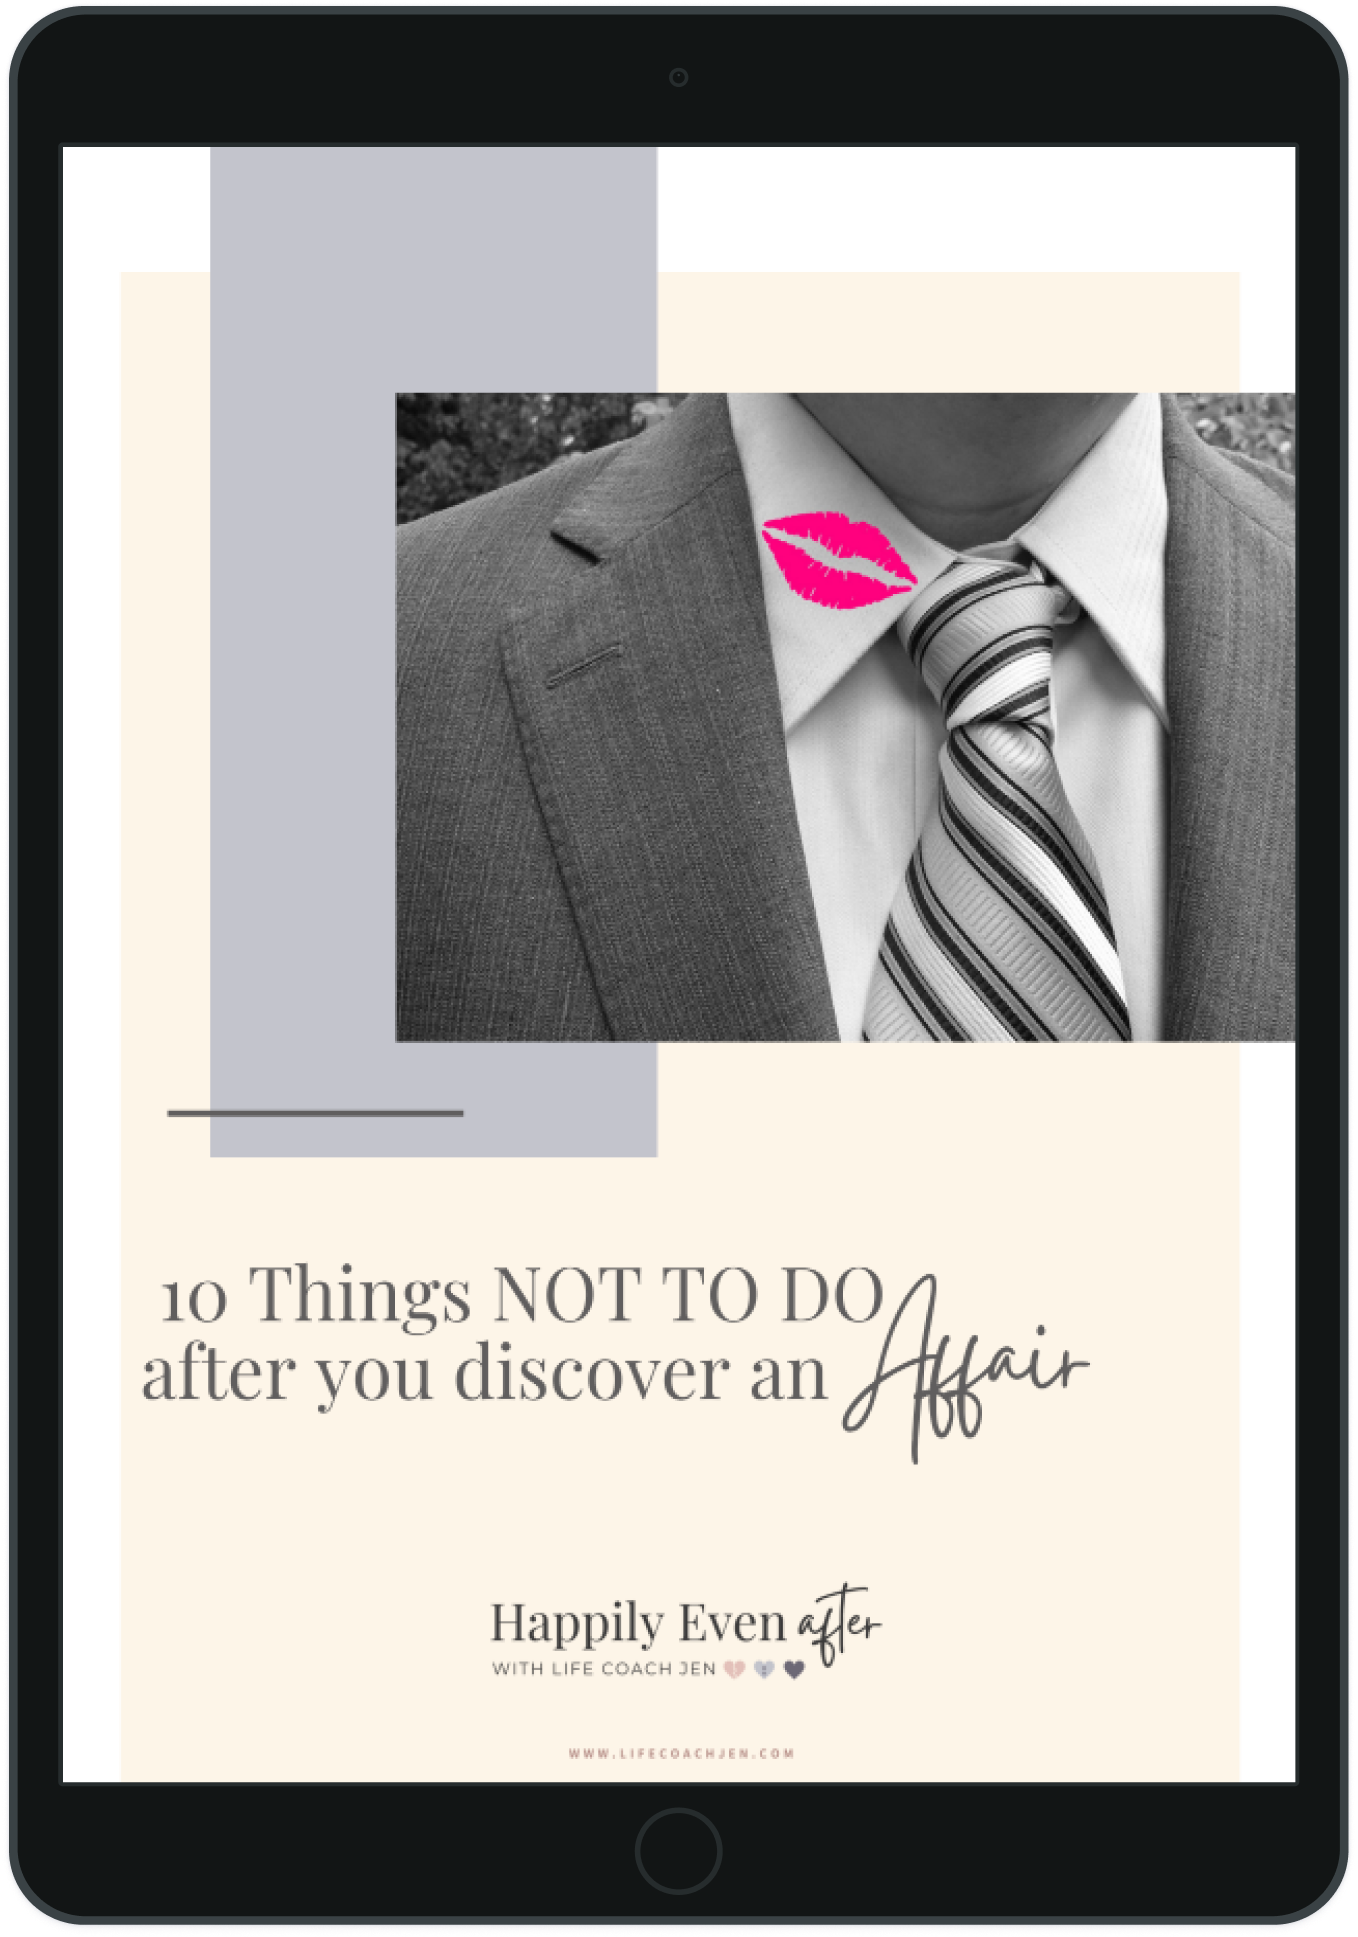 An ipad screen displaying an ebook cover titled "10 things not to do after you discover an affair" by life coach jen w., featuring a grayscale image of a man in a suit with a red lipstick mark on his cheek.